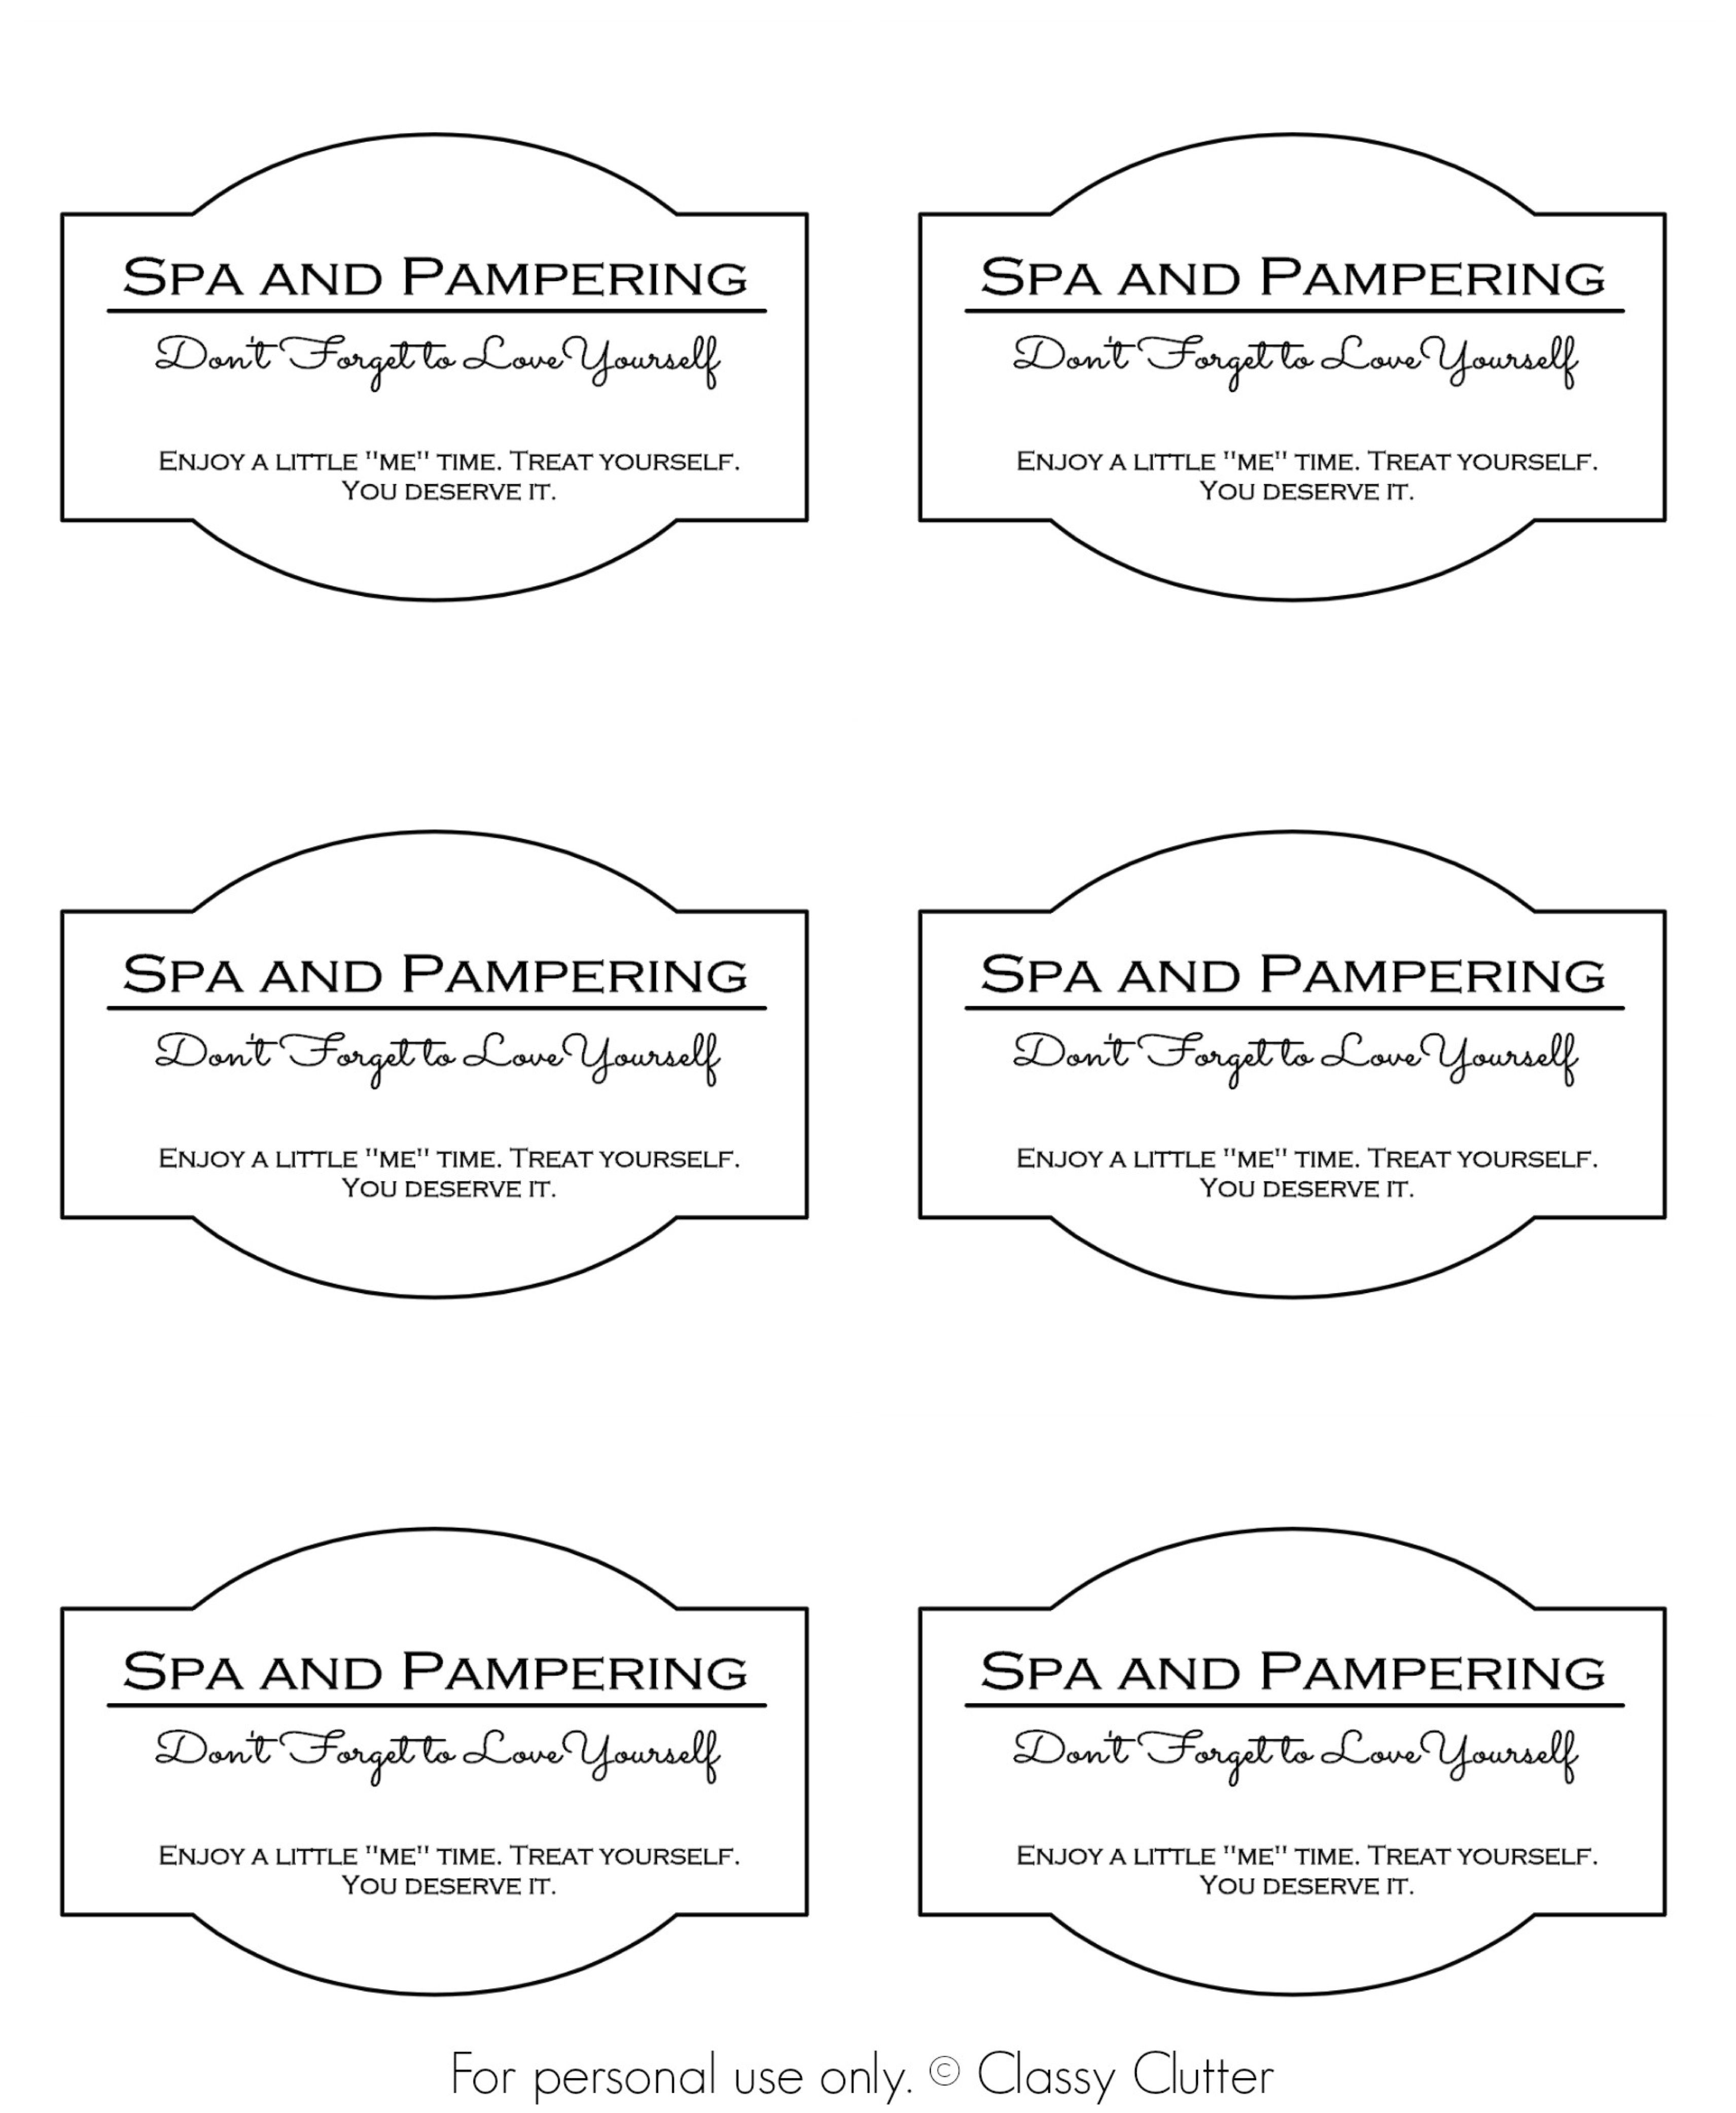 Spa And Pampering In A Jar | Baskets | Pinterest | Spa In A Jar, Spa - Spa In A Jar Free Printable Labels